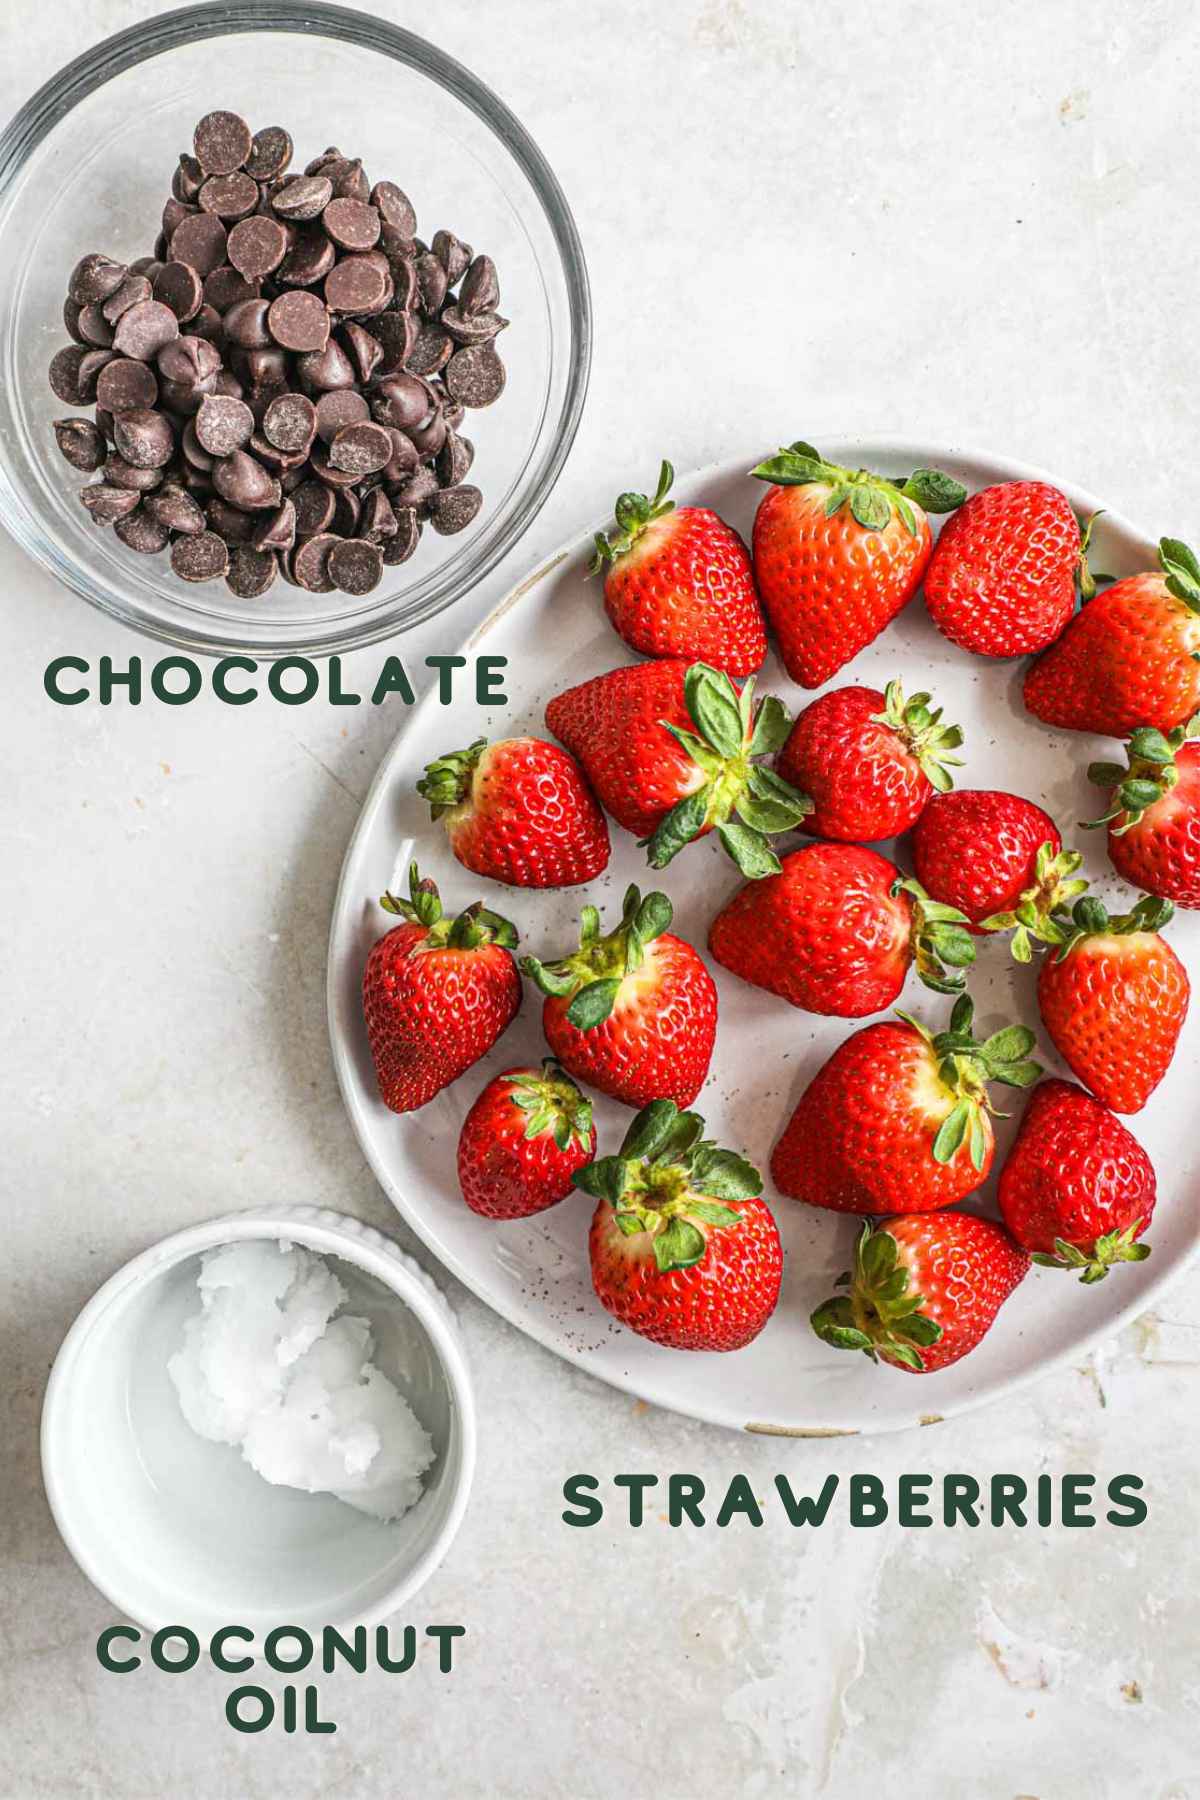 Ingredients to make chocolate covered strawberries, including chocolate, coconut oil, and strawberries.